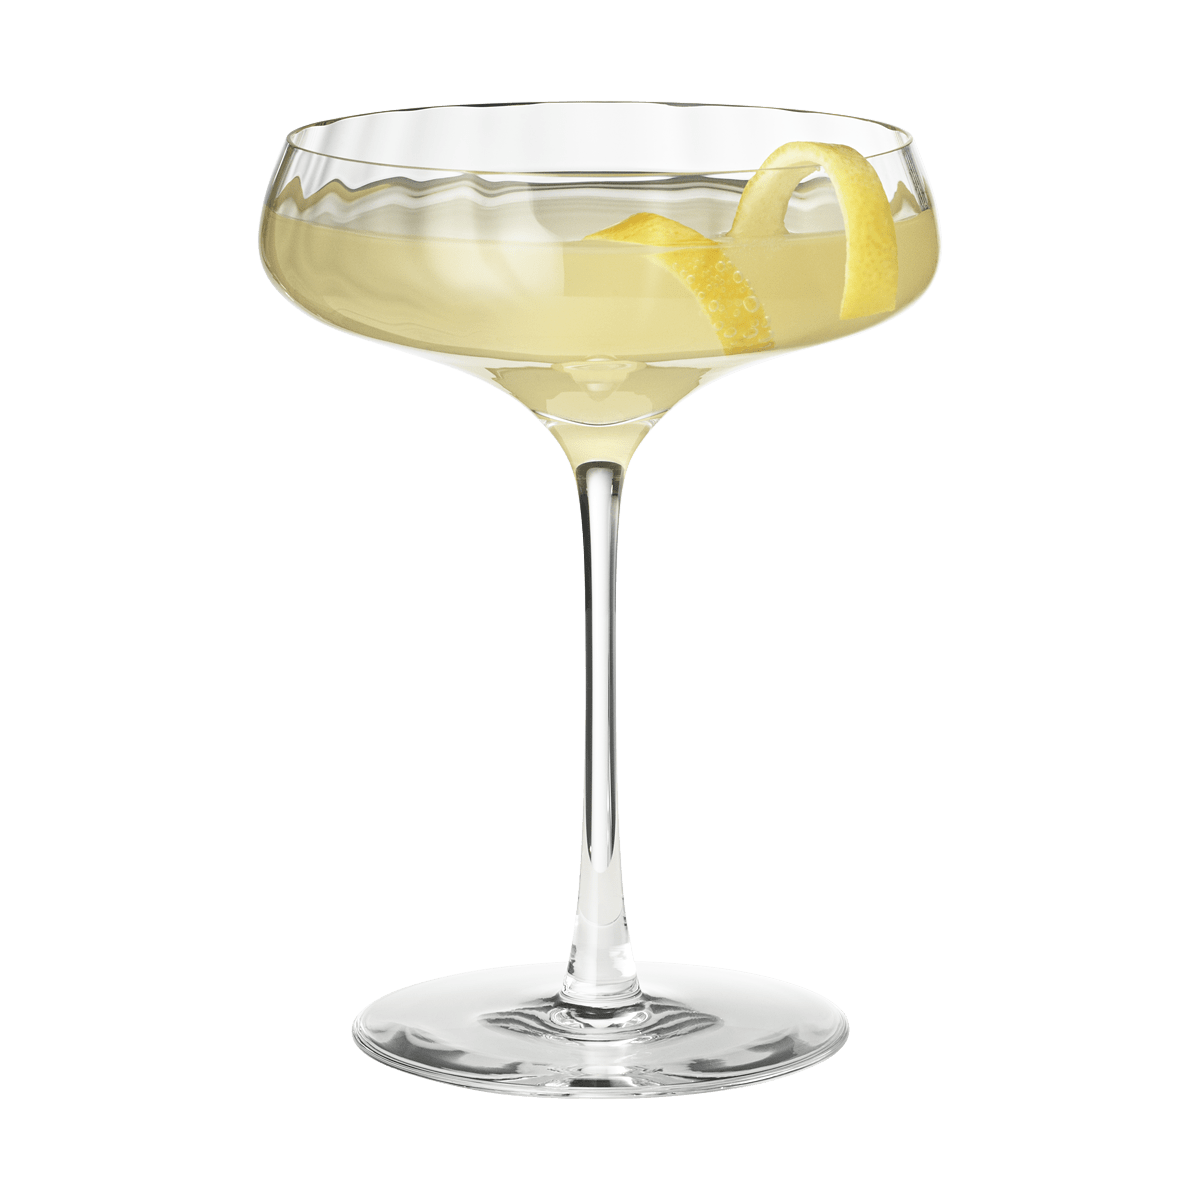 https://res.cloudinary.com/georgjensen/image/upload/f_auto,dpr_2/w_auto,c_scale/products/images/hi-res/10019696_BERNADOTTE_COCKTAIL_COUPE_GLASS_CRYSTALLINE_20CL_2PCS_02?_i=AG